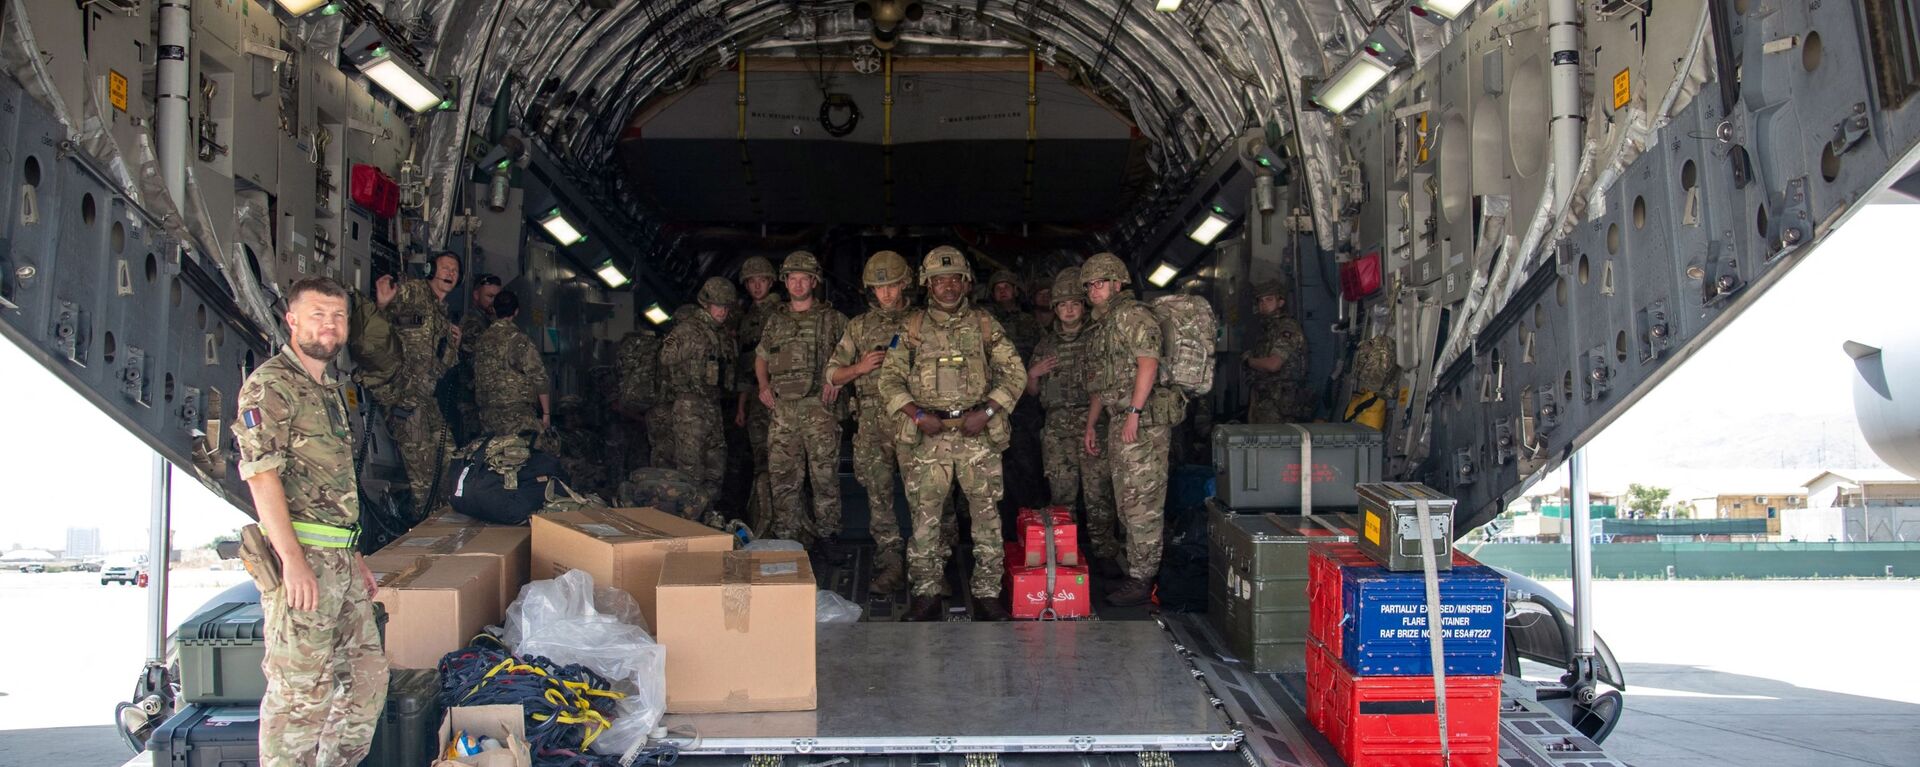 A handout picture taken and released by the British Ministry of Defence (MOD) on August 15, 2021 shows members of the British Army, from 16 Air Assault Brigade, as they disembark from an RAF Voyager aircraft after landing in Kabul, Afghanistan, to assist in evacuating British nationals and entitled persons as part of Operation PITTING - Sputnik International, 1920